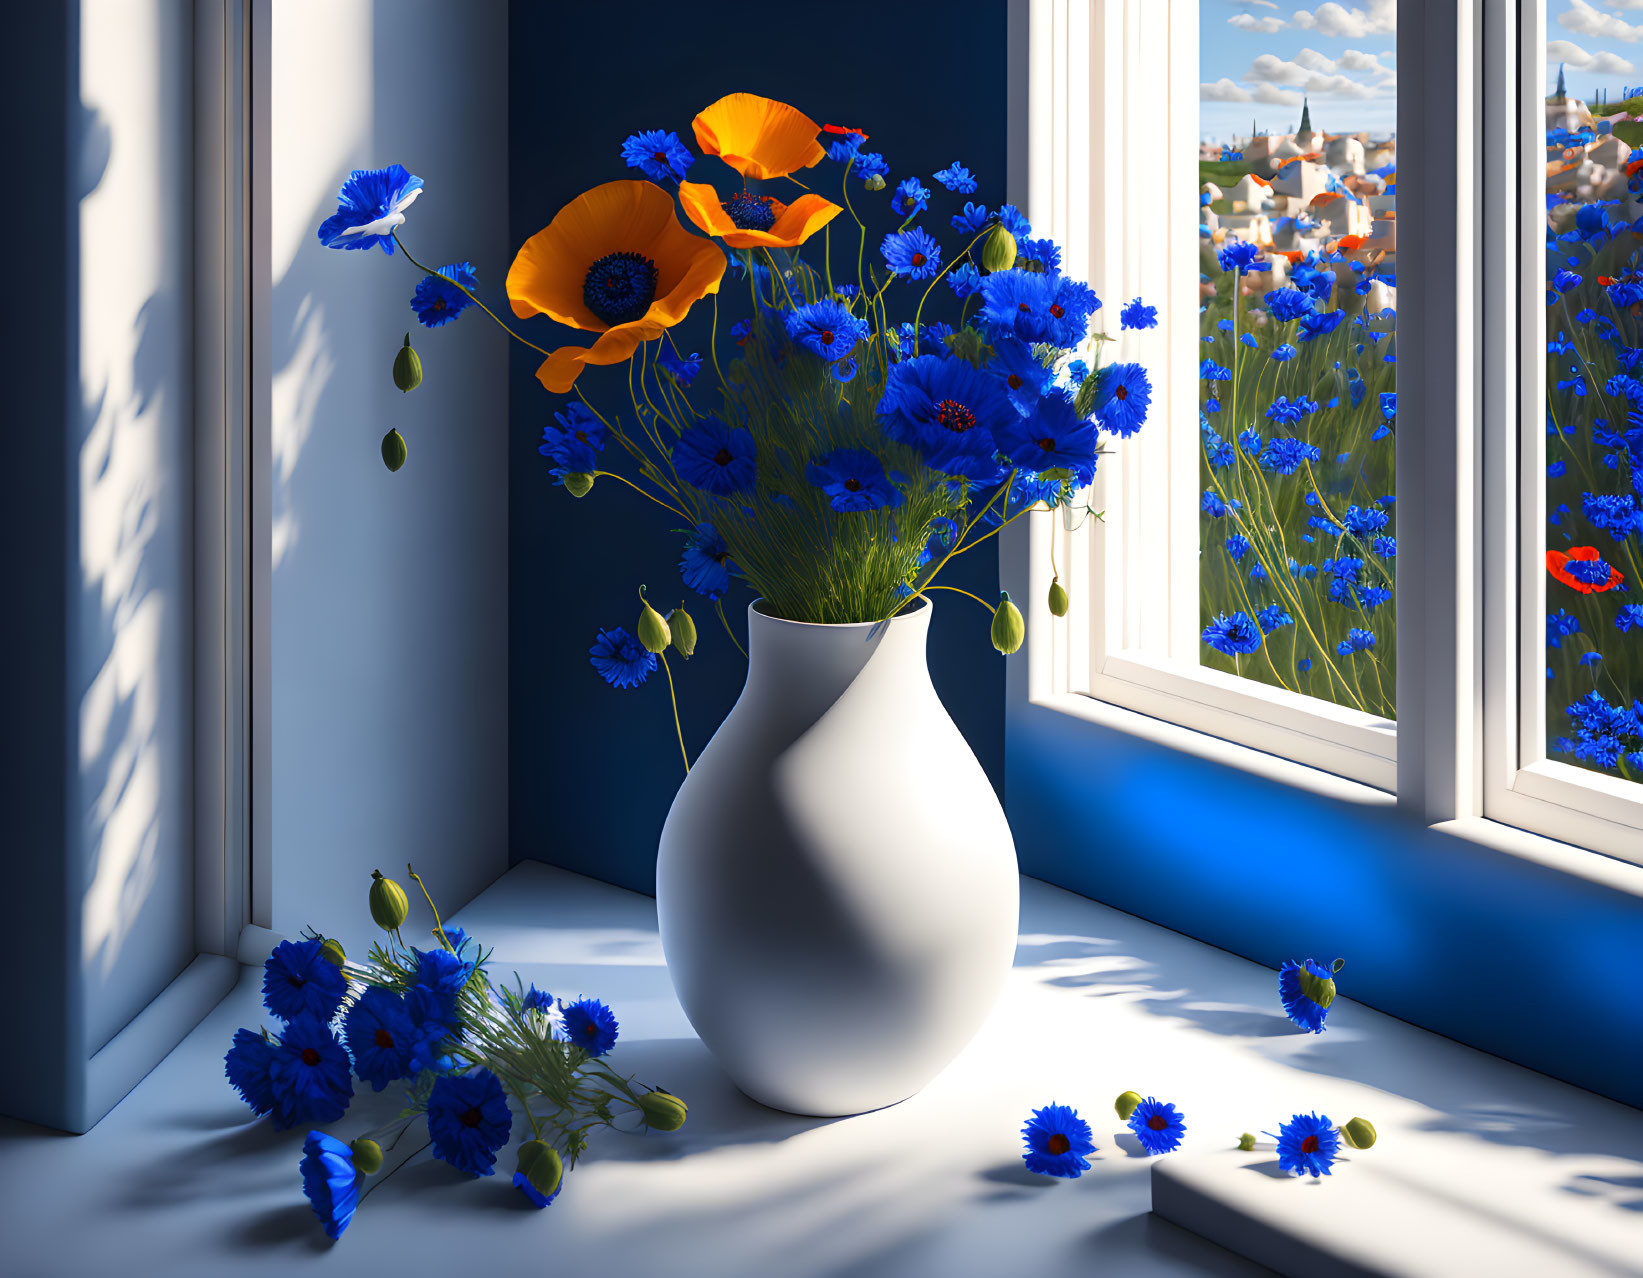 White Vase with Blue and Orange Flowers by Window in Quaint Village